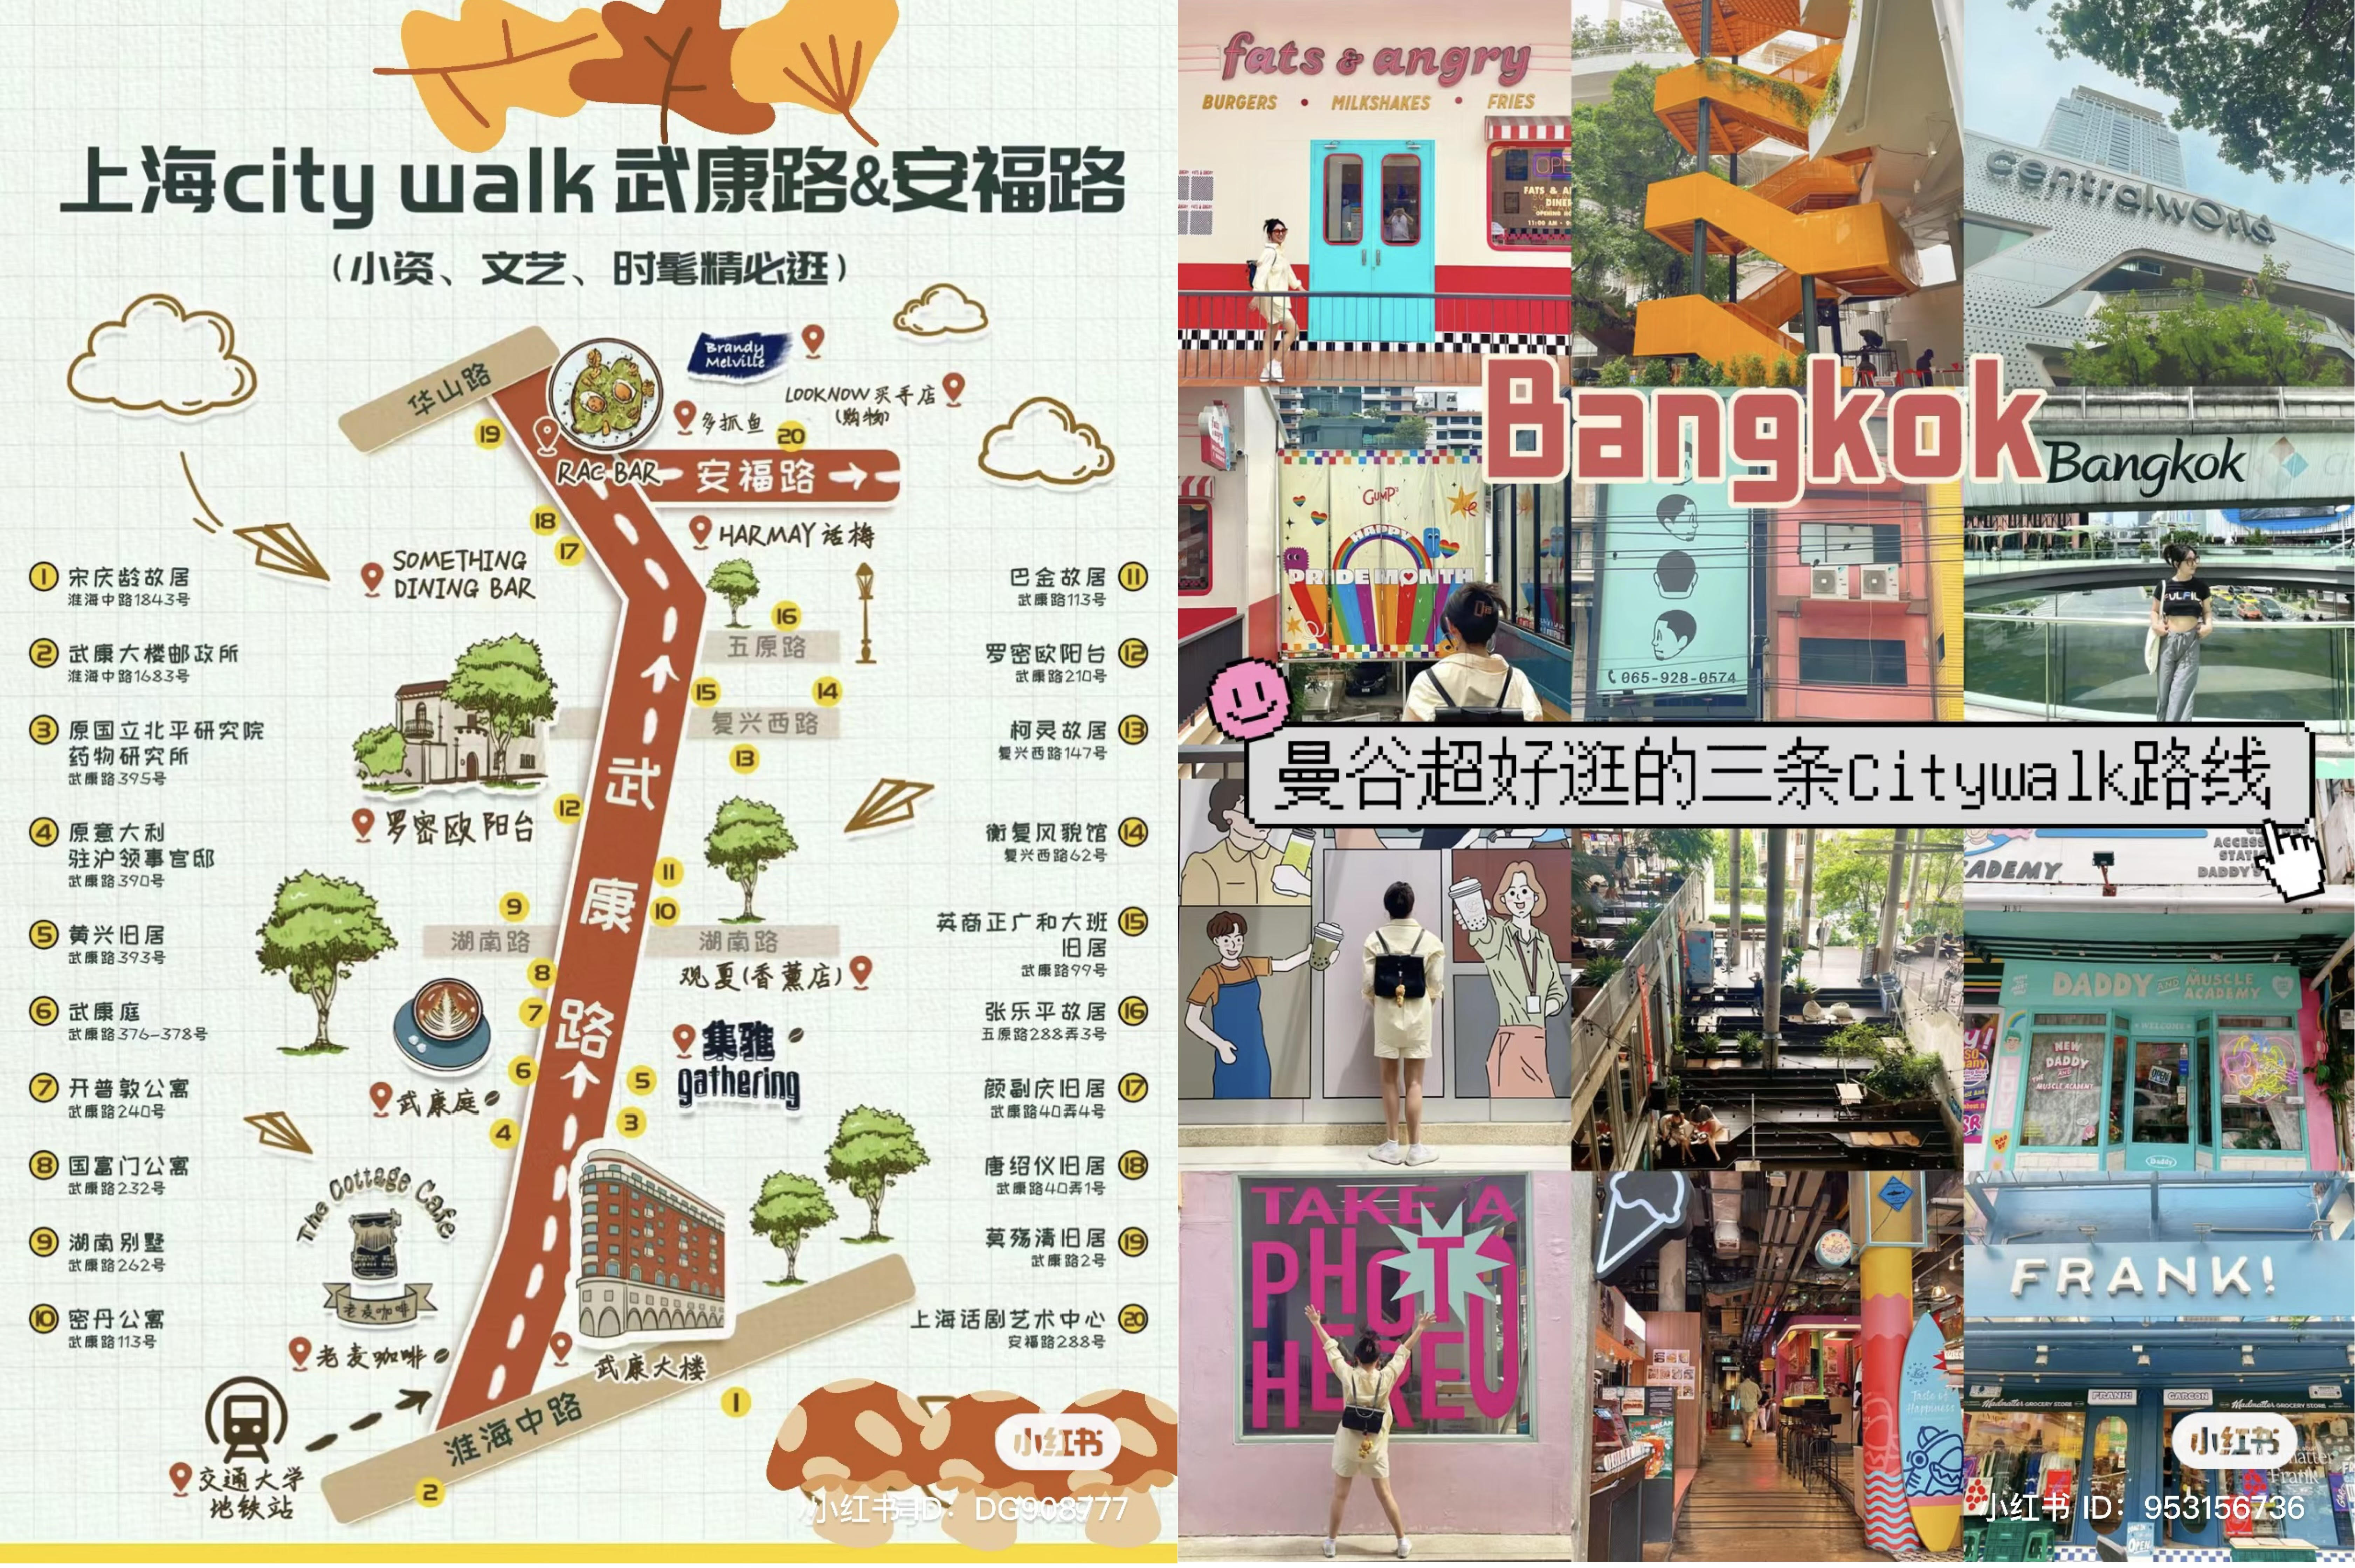 People sharing their citywalk route in different cities on Xiaohongshu, Photo Credit: Xiaohongshu @DG0908777 @953156736